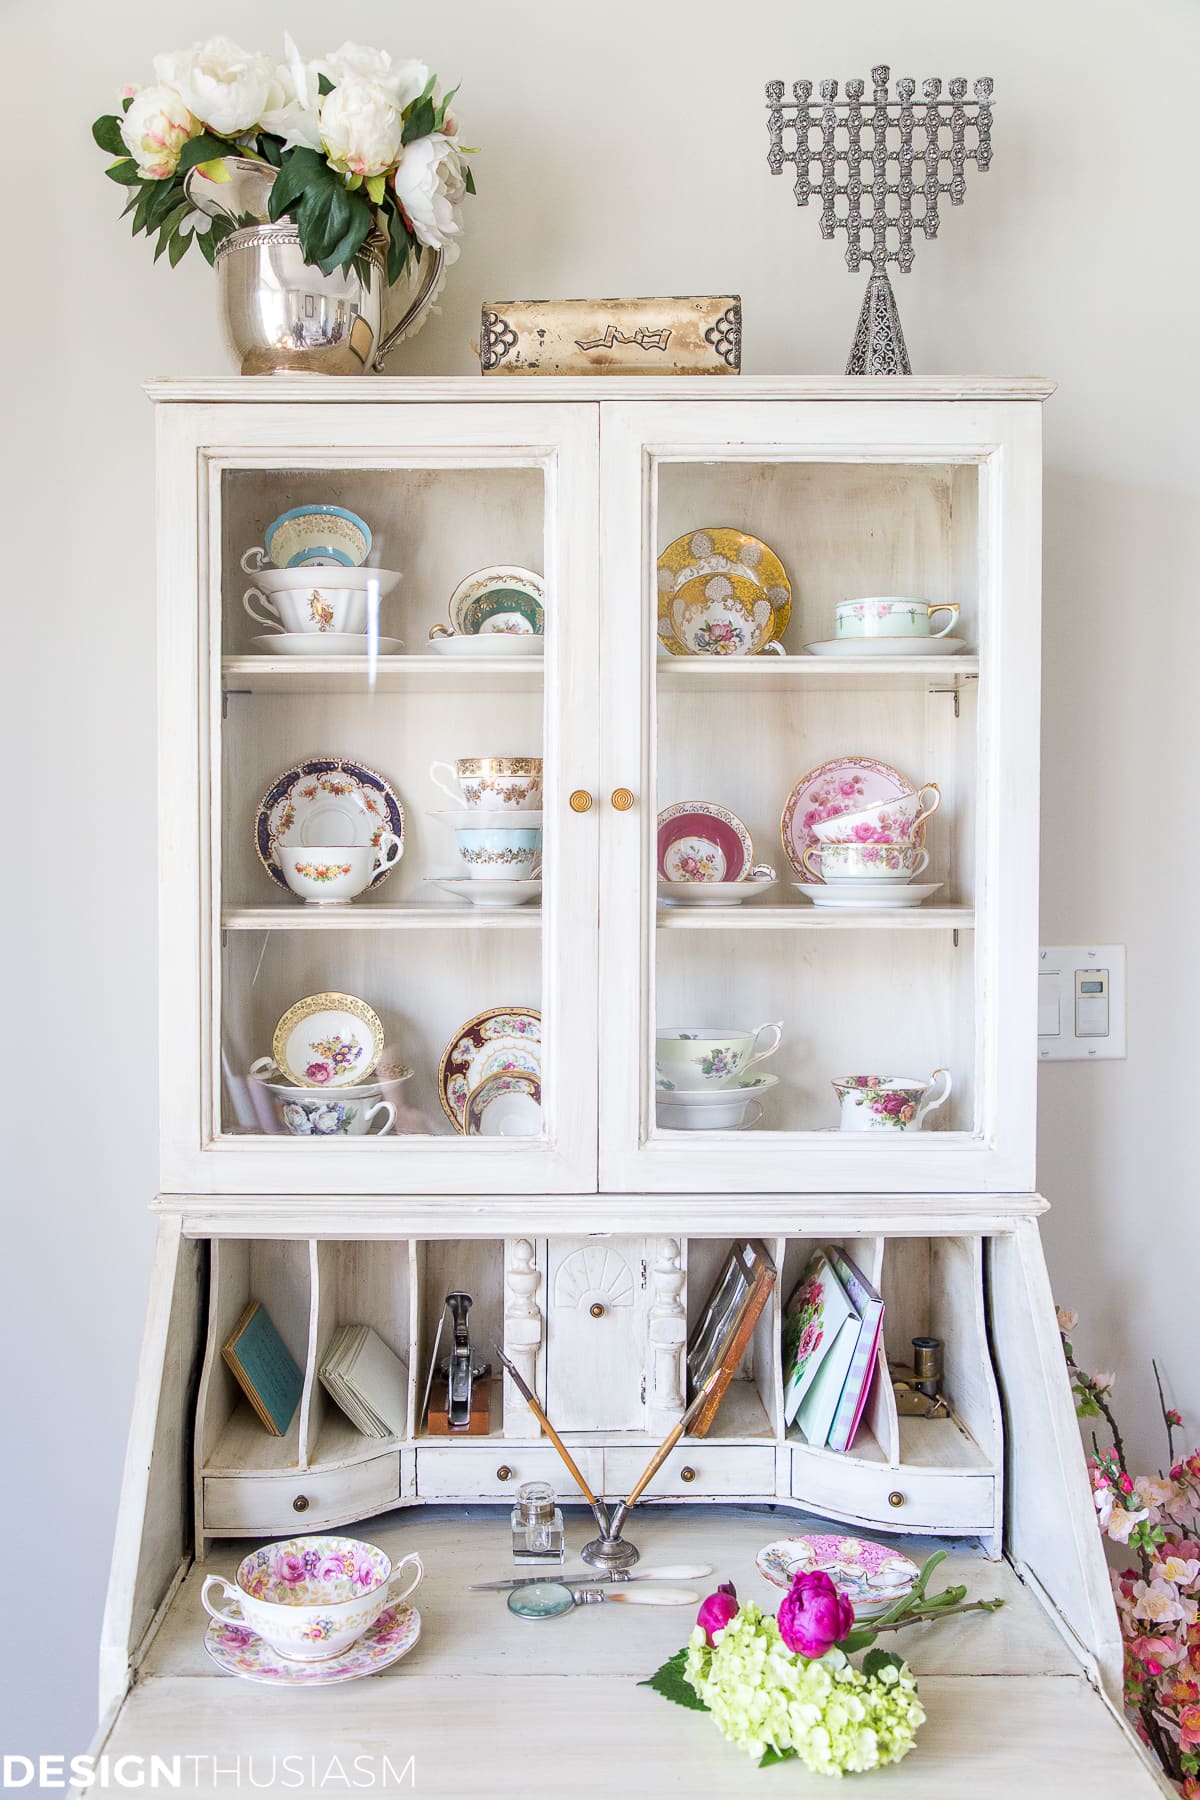 Vintage tea cups and plates on display in antique cabinets